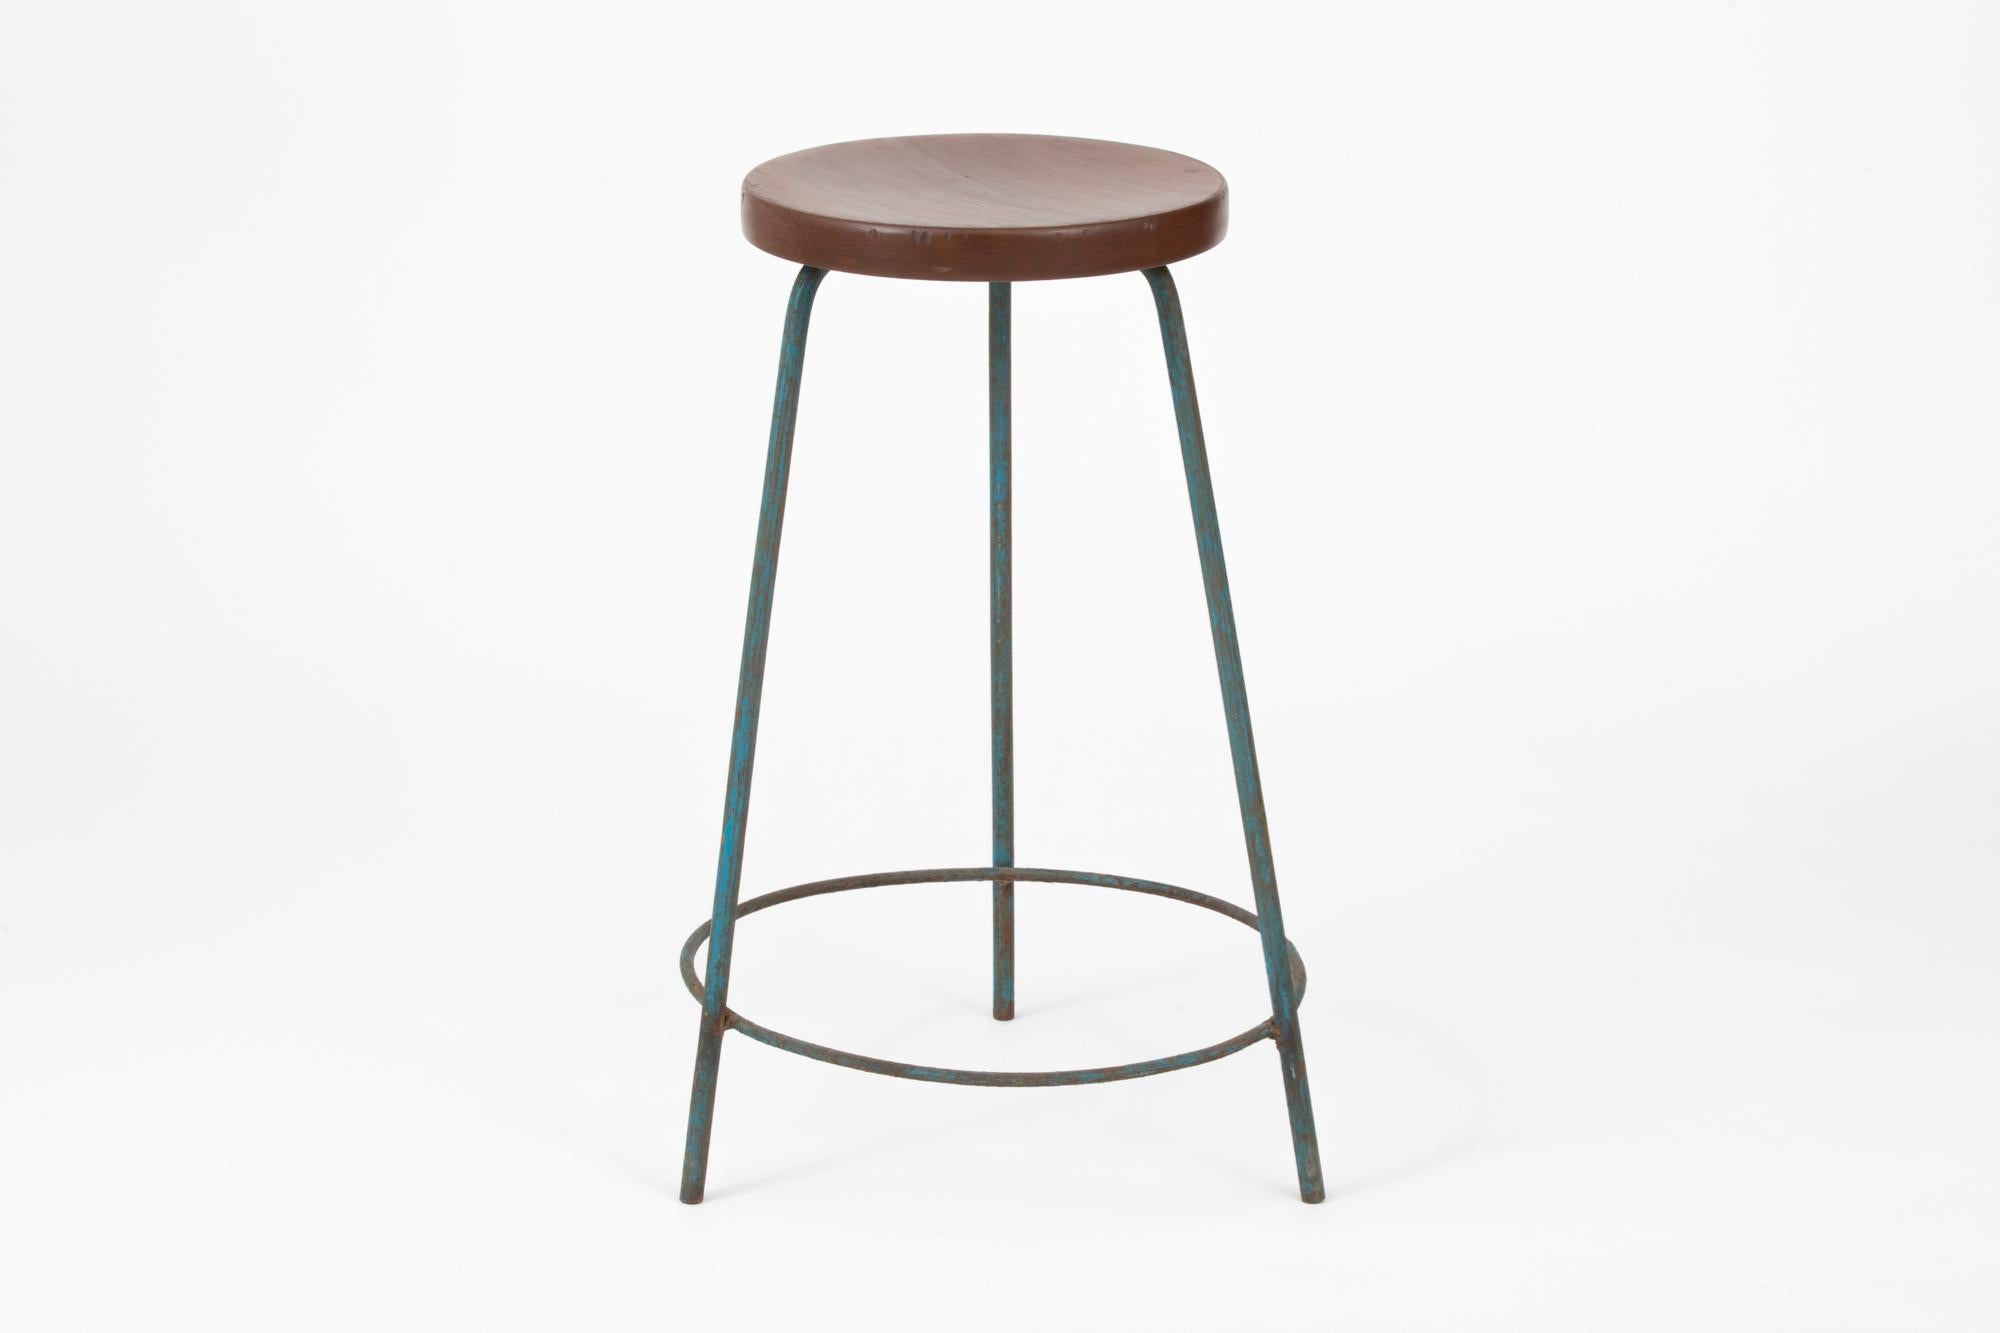 Pair of original painted iron and teak bar / work stools designed by Pierre Jeanneret. These stools were created for the famous modernist capital city of Chandigarh, India that was designed by Le Corbusier, Jeanneret, and their team. Model number